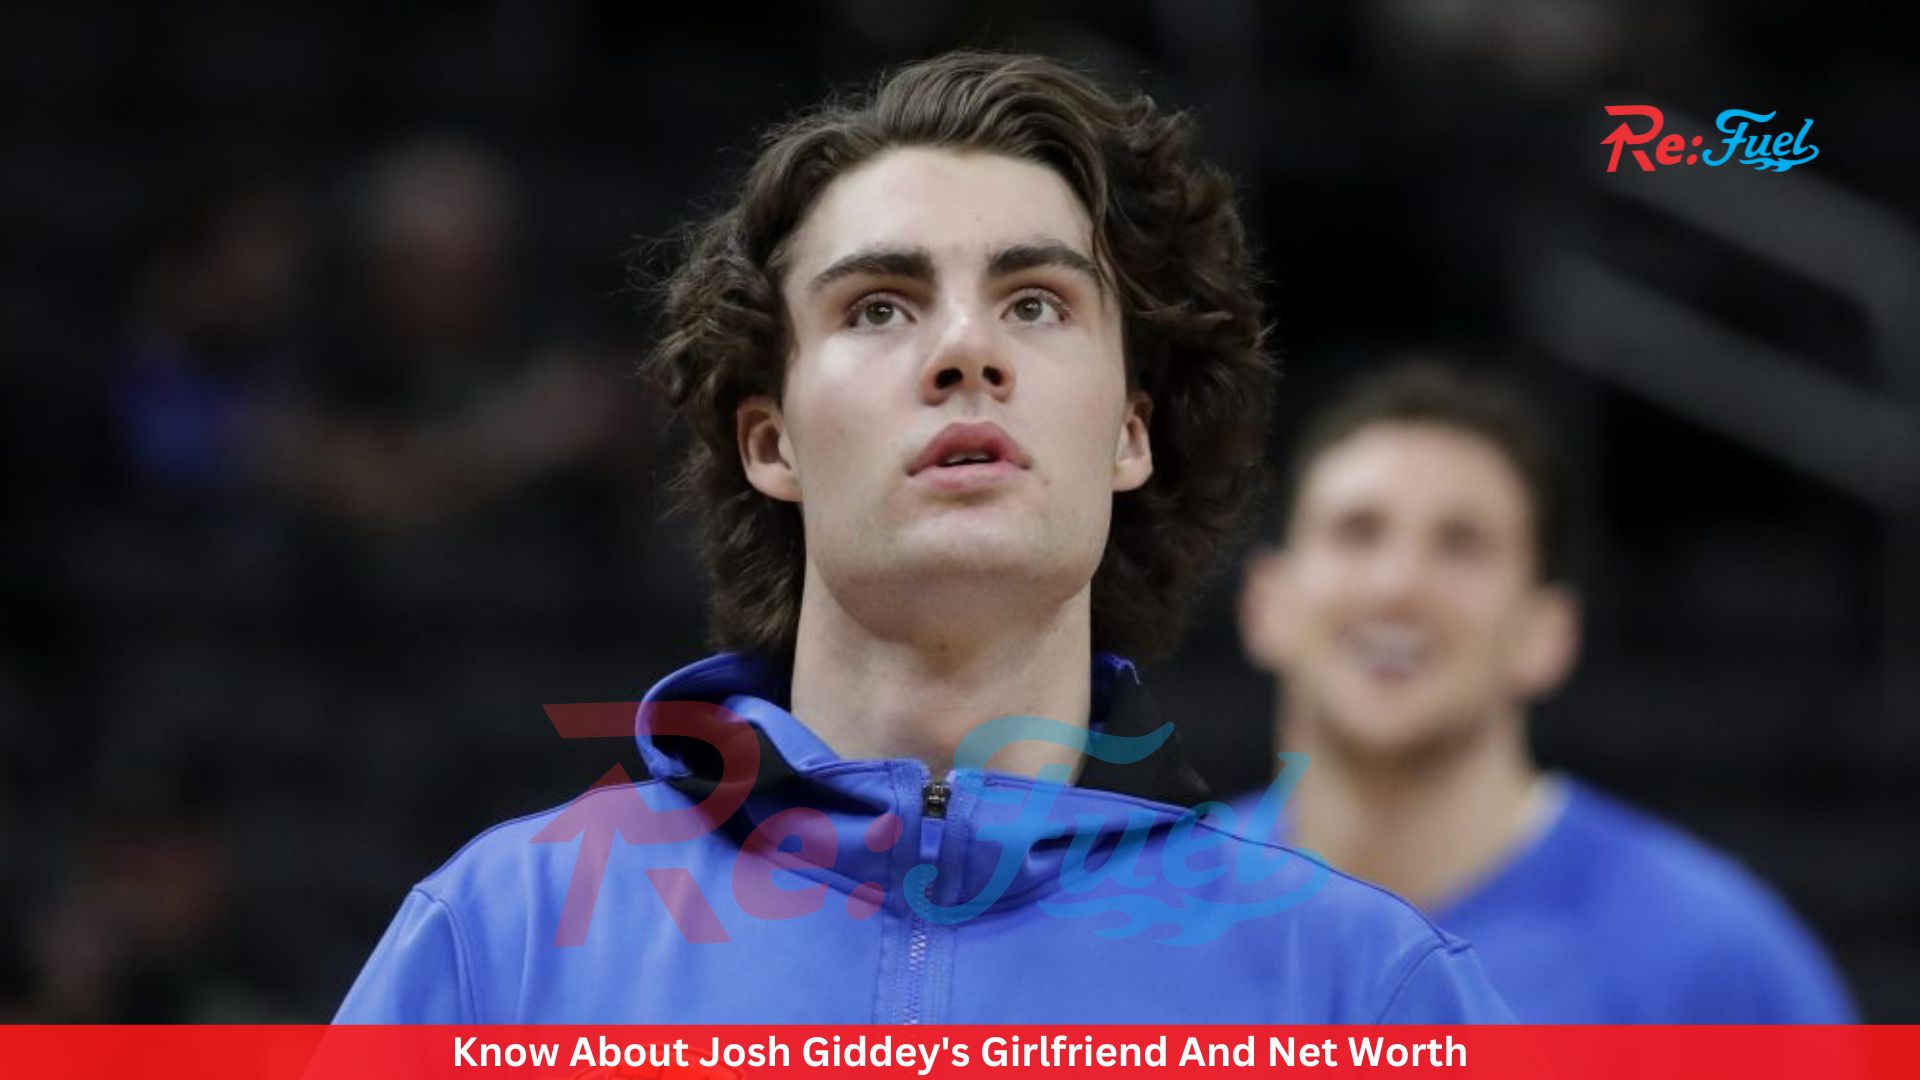 Know About Josh Giddey's Girlfriend And Net Worth